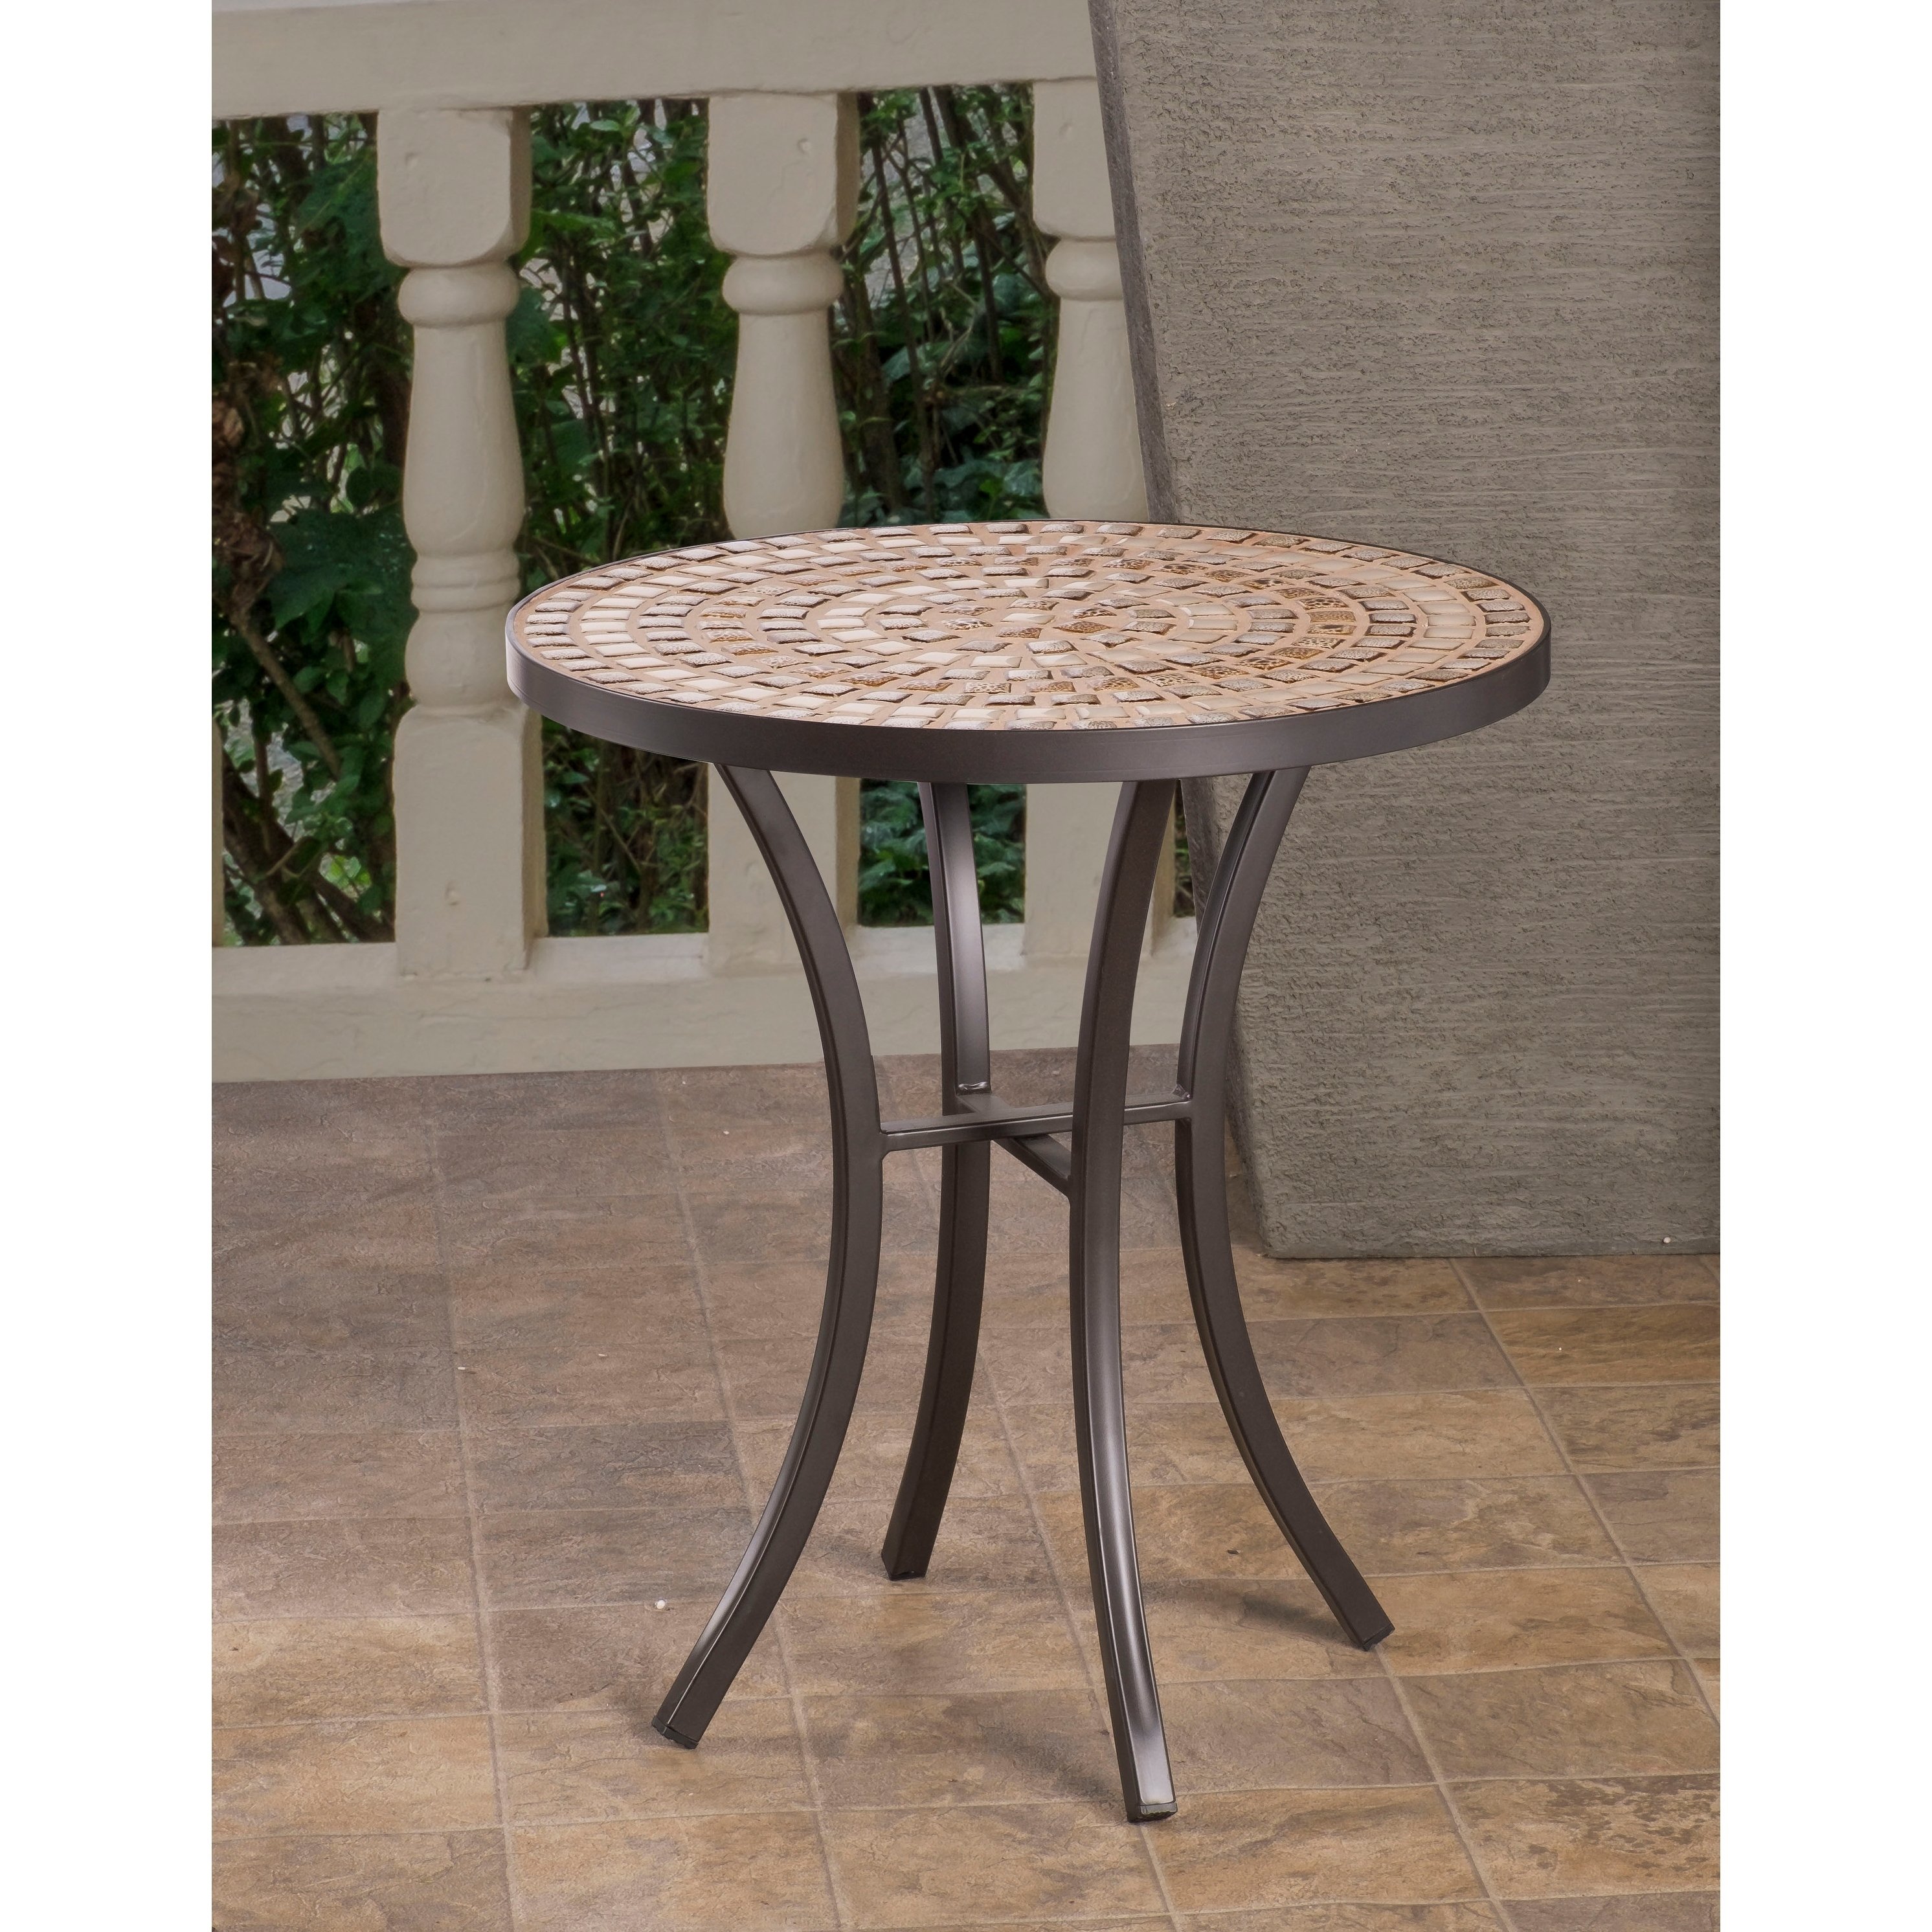 boracay beige ceramic and wrought iron inch round mosaic outdoor side table with tile top base accent free shipping today dining room sets lucite coffee white runner west elm best